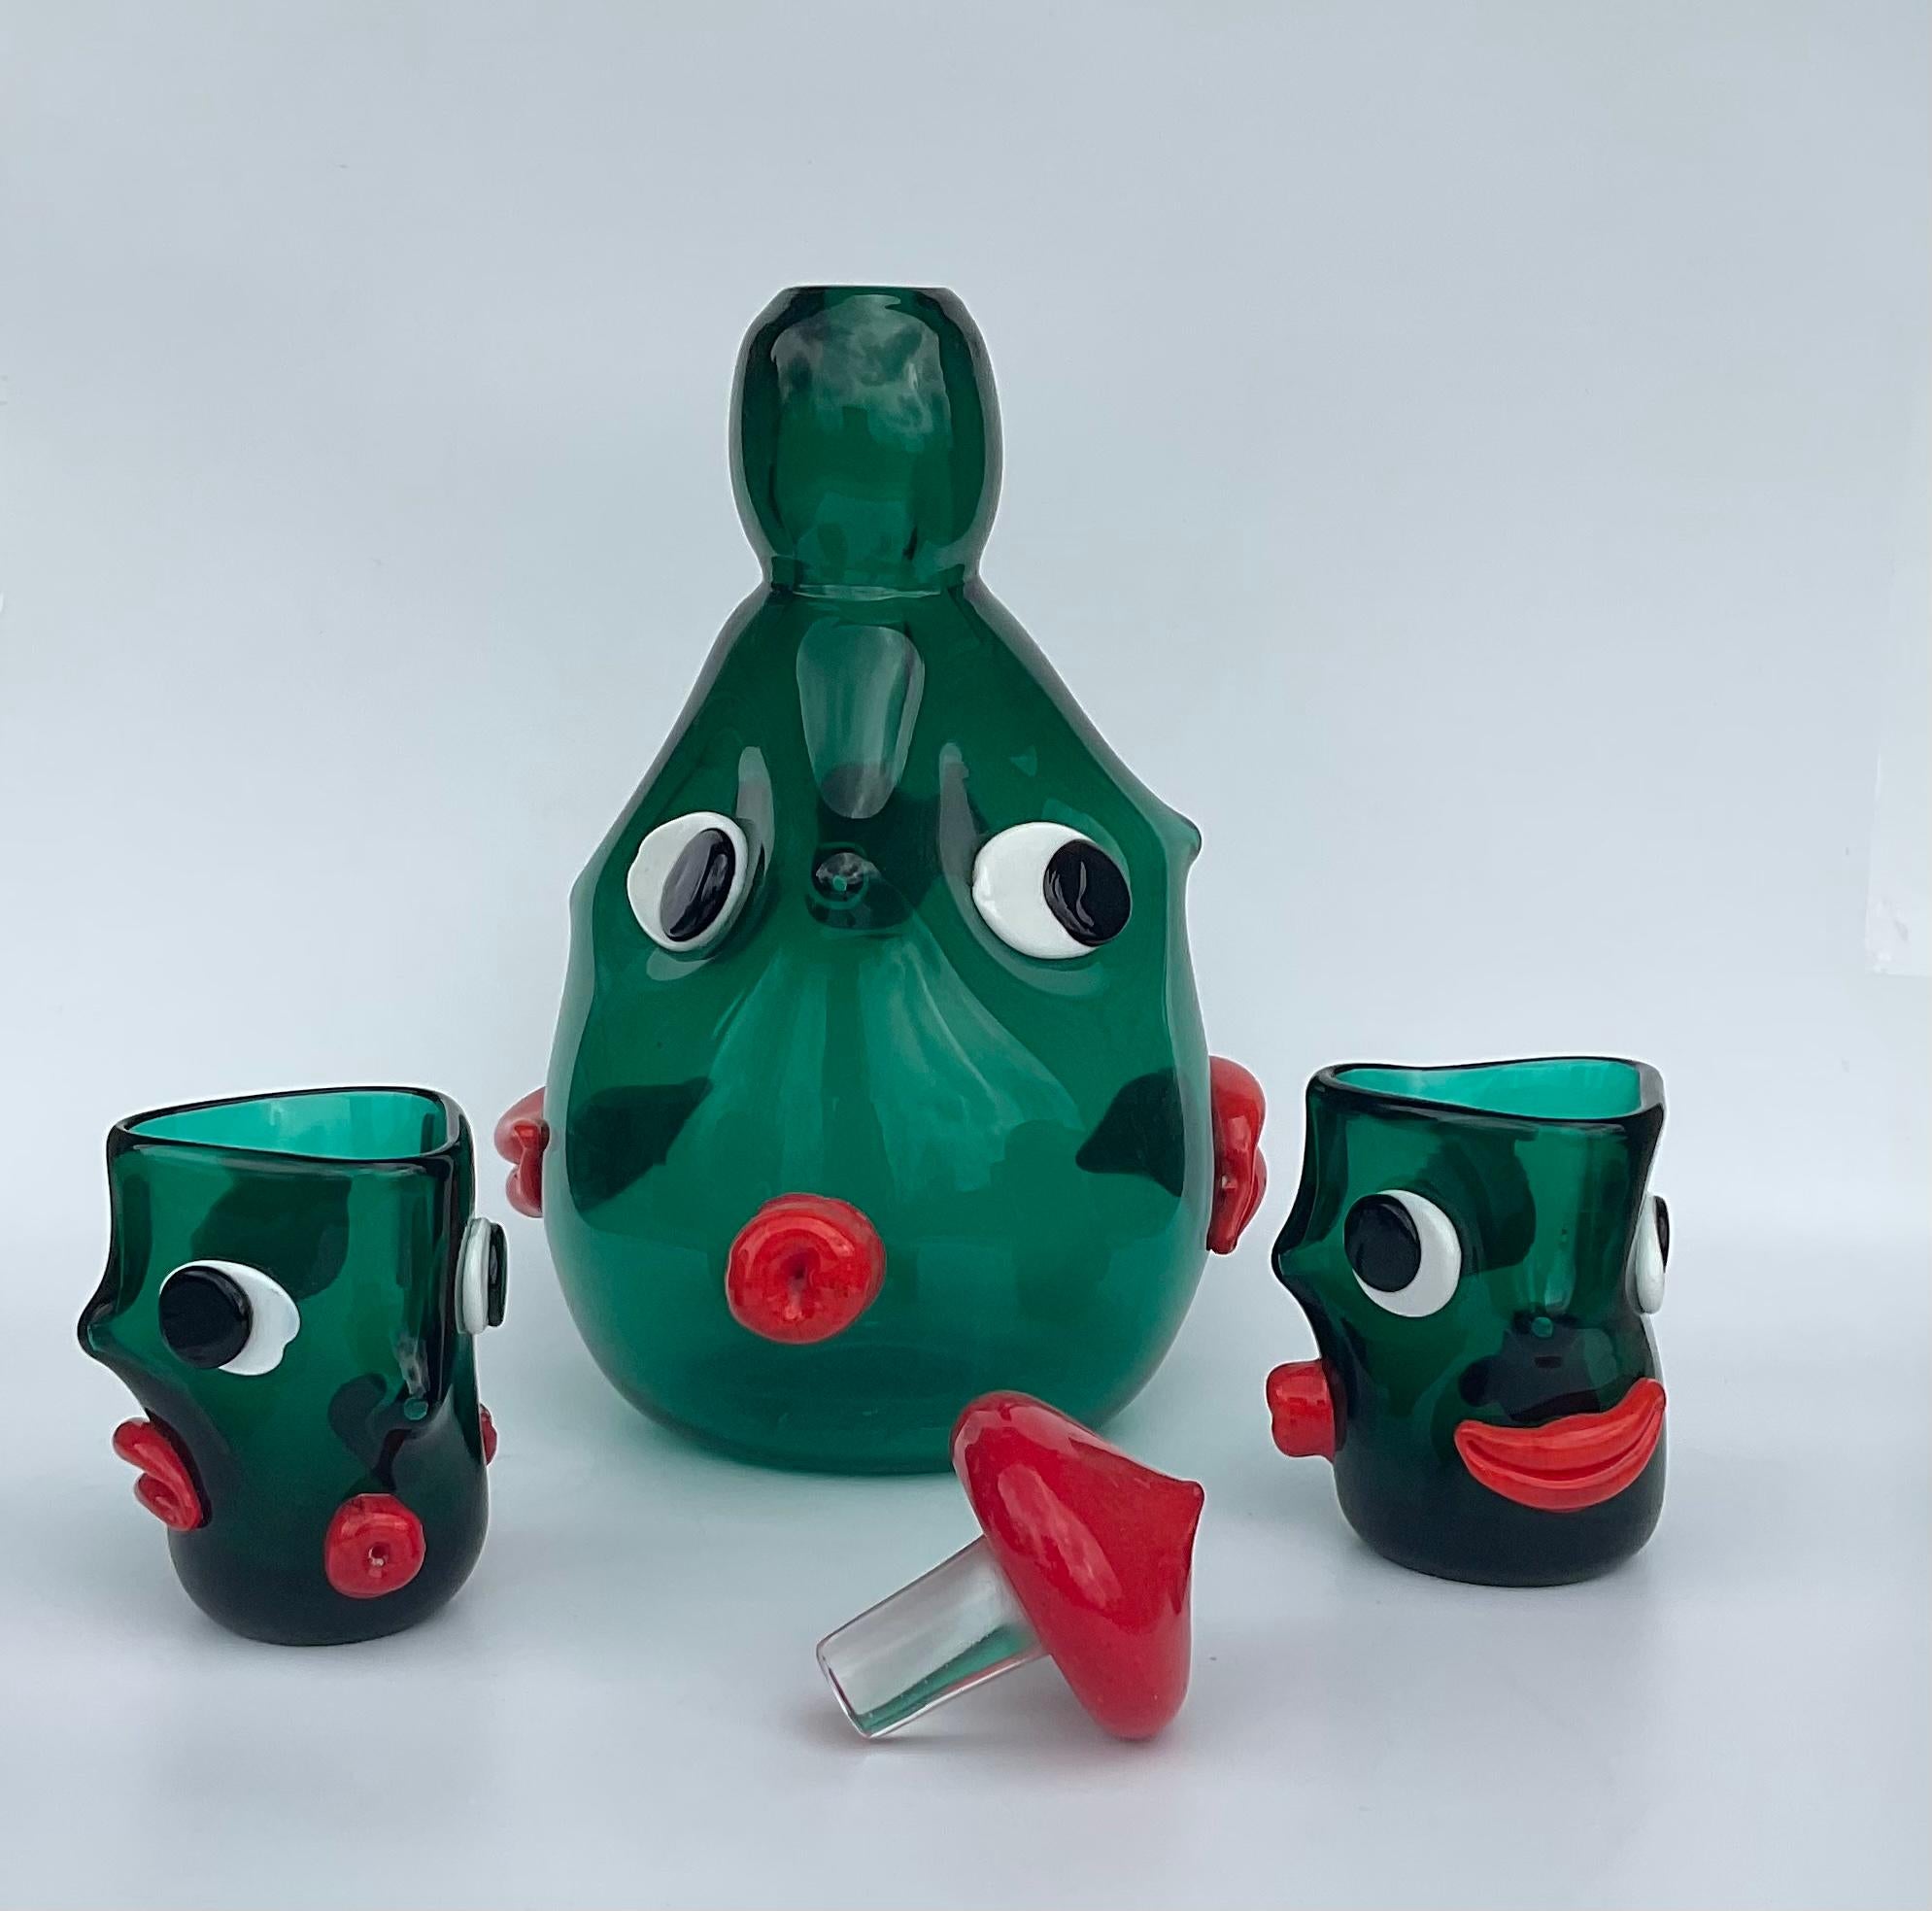 Rare Murano handblown green Italian art glass large decanter with 2 matching glasses done in red applied pasta glass with 3 different faces. Documented to designer Anzolo Fuga. . Similar pieces are described in the Anzolo Fuga book, as In the manner